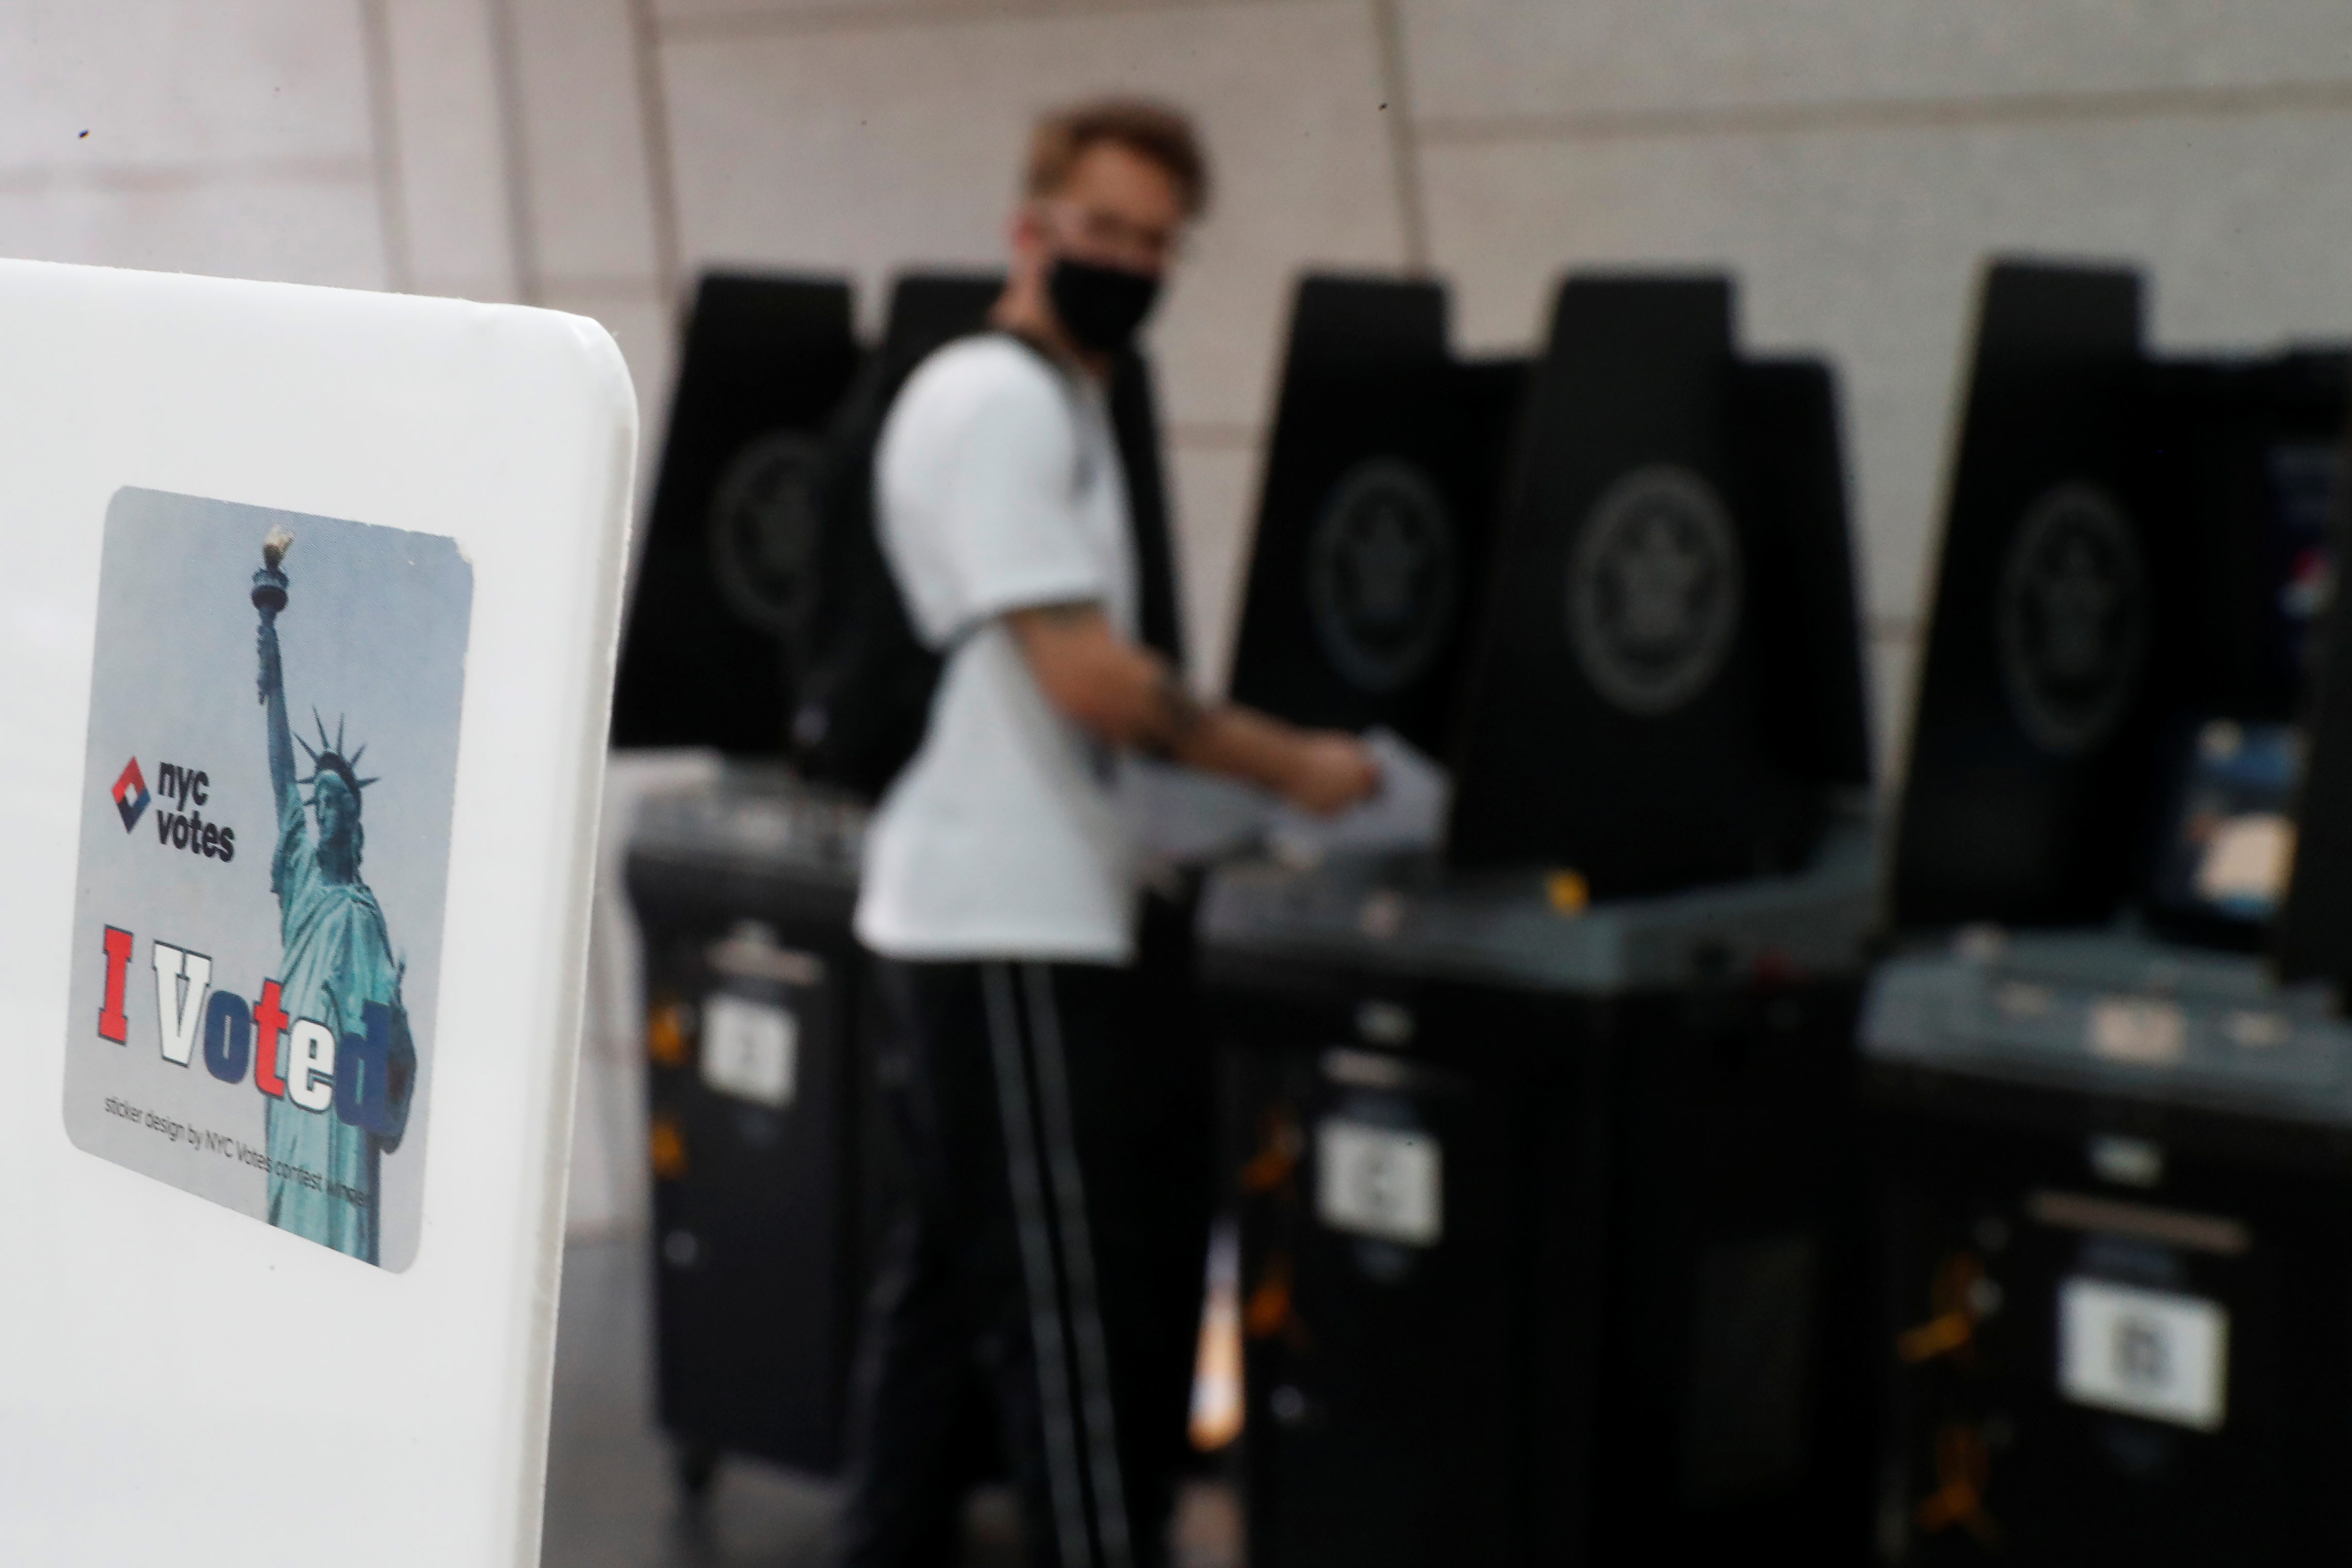 A voting sticker with the Statue of Liberty is seen as a voter casts his ballot in the New York Primary election